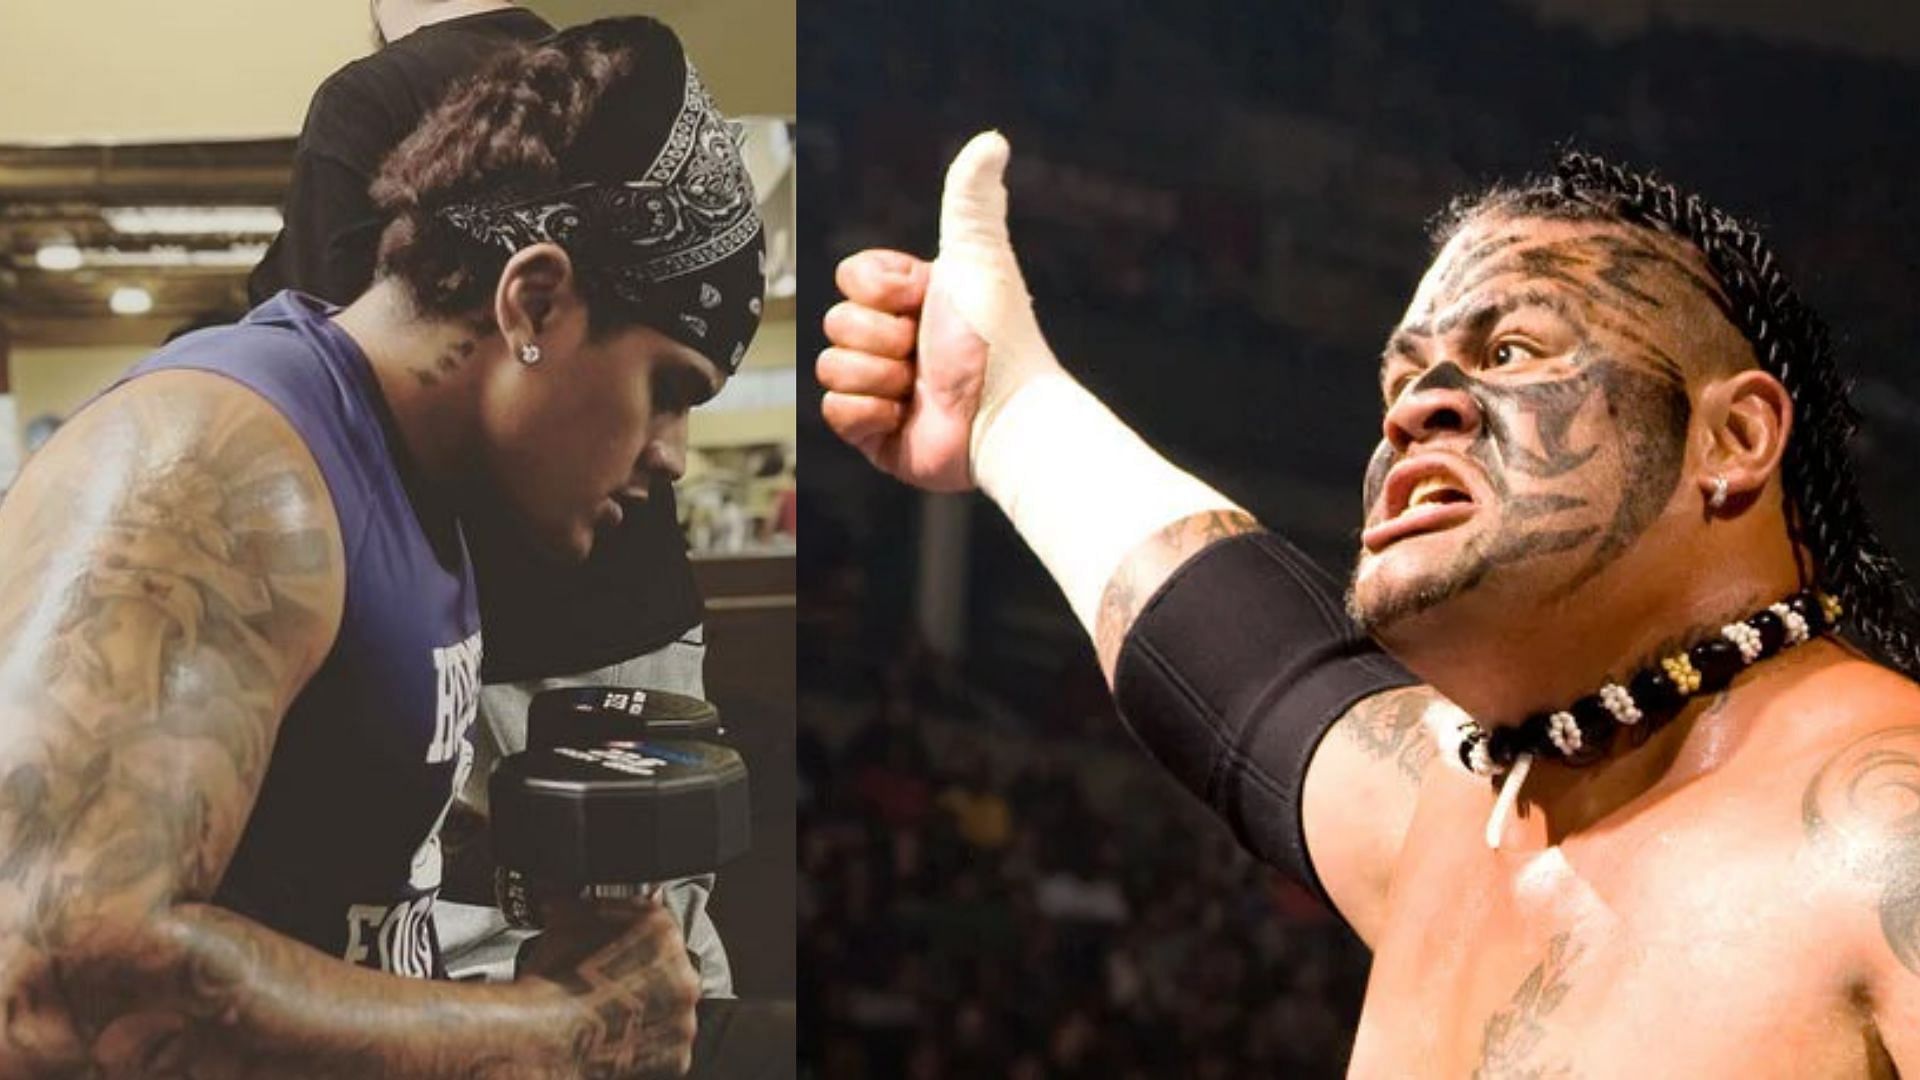 Zilla Fatu is the youngest son of late WWE Superstar Umaga